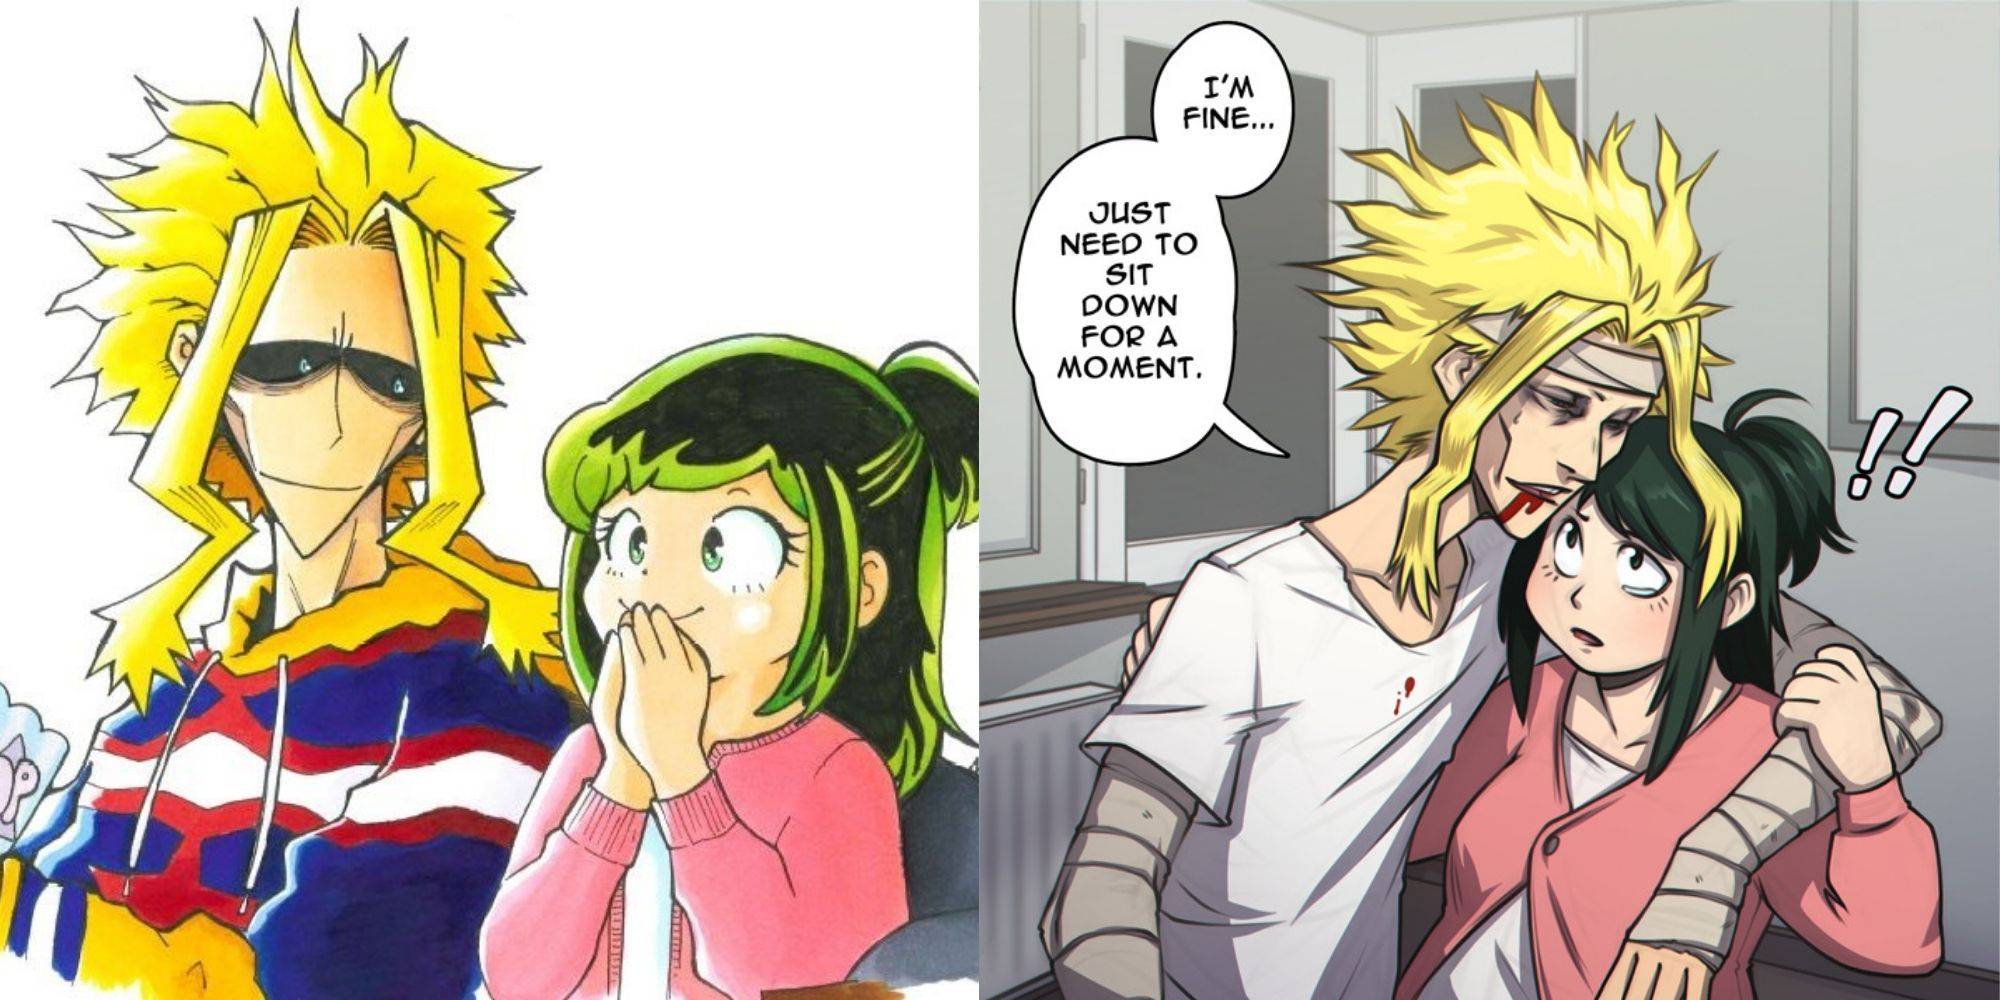 All might and inko